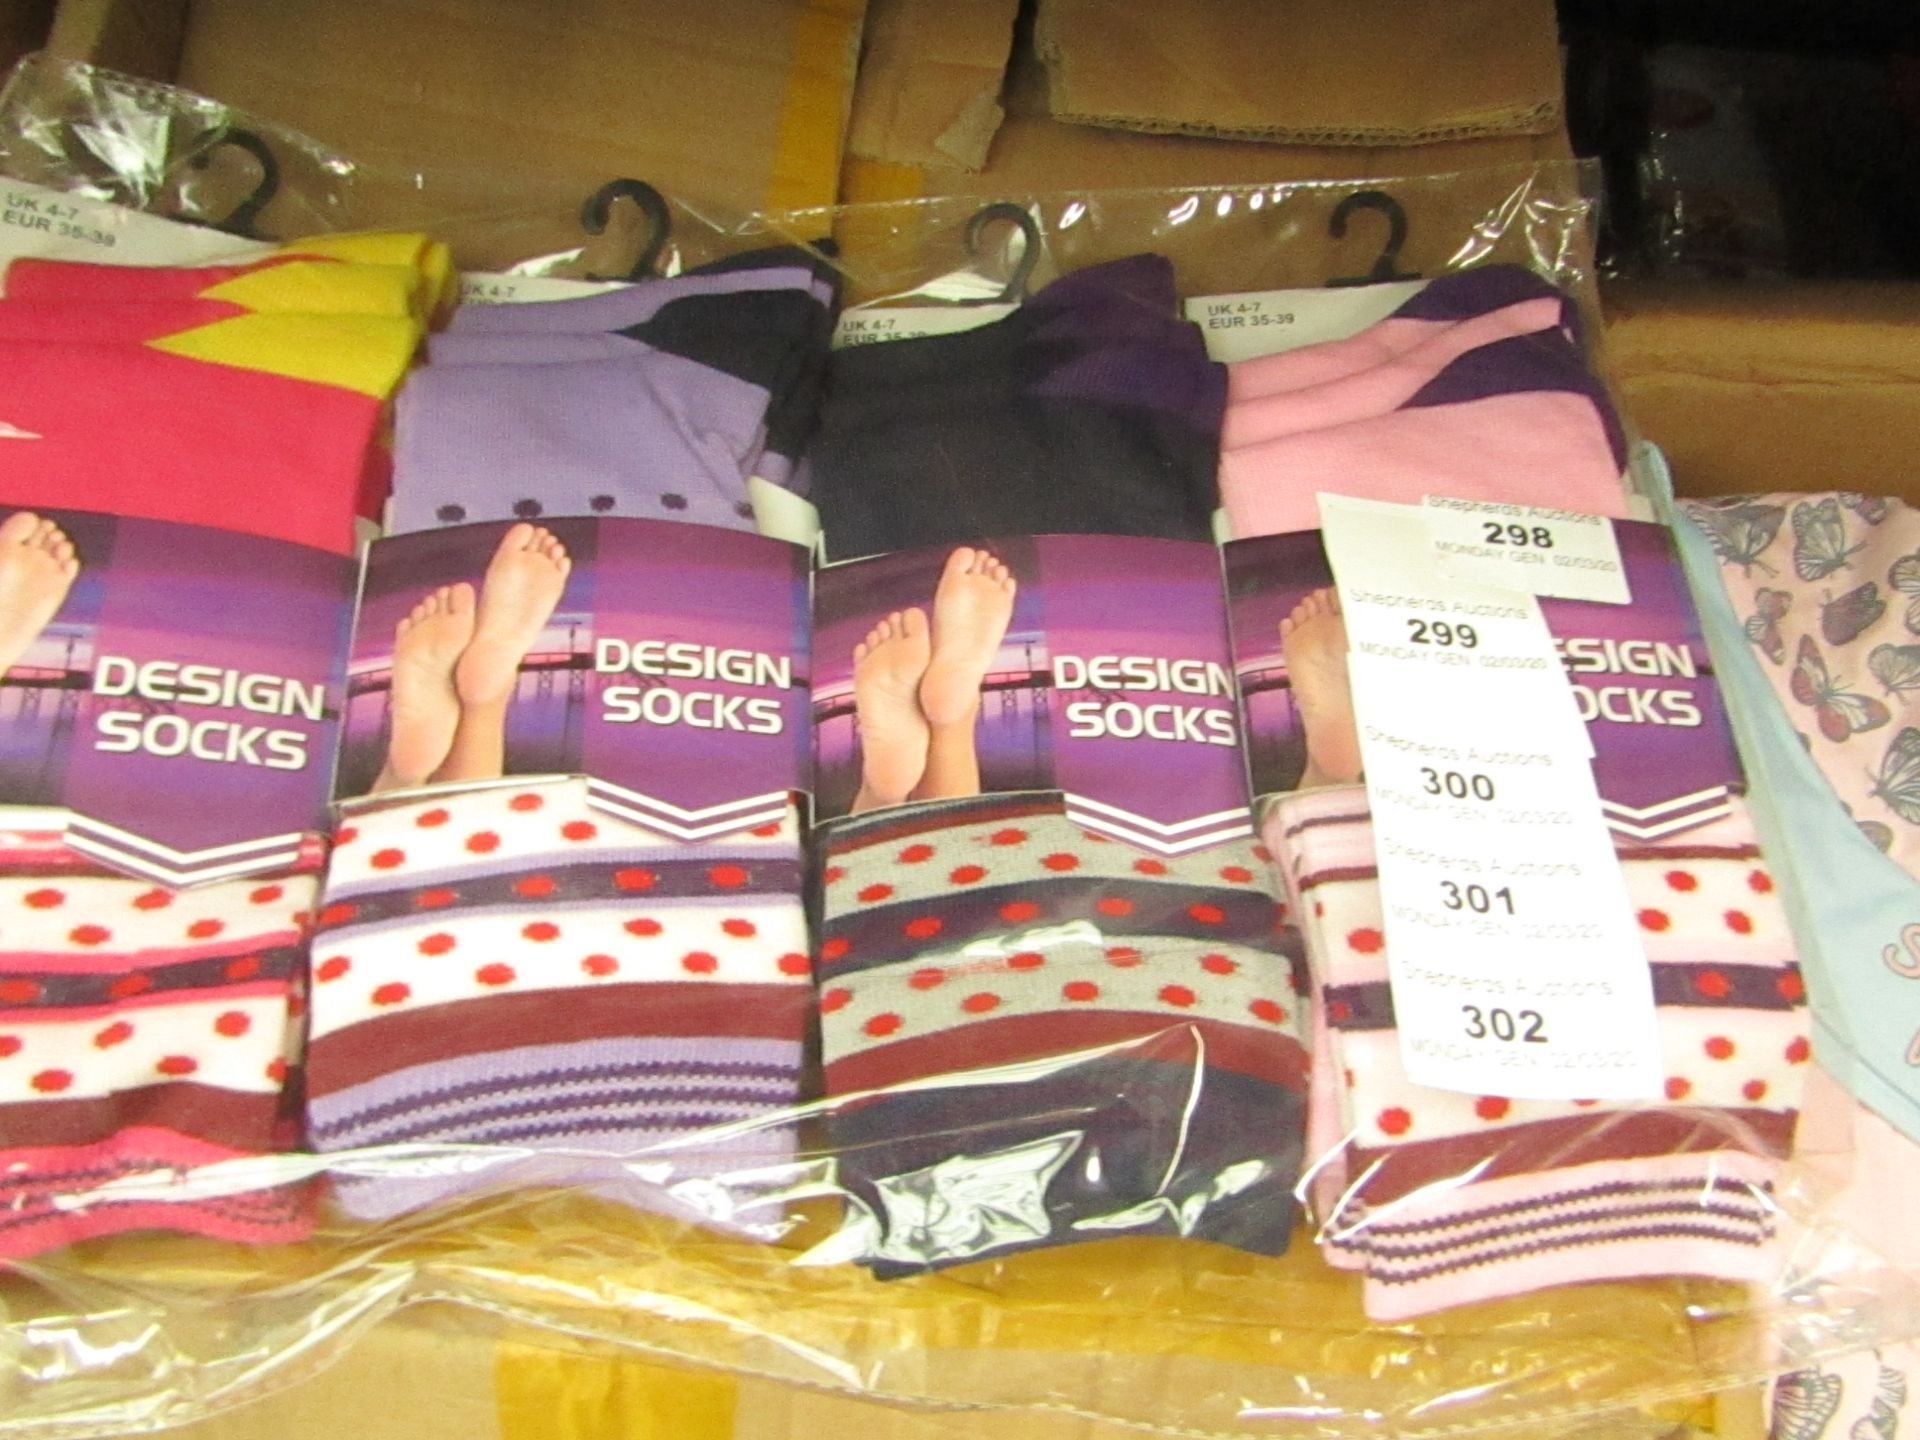 12 Pairs of Ladies Design Socks. Size 4 - 7. New & Packaged